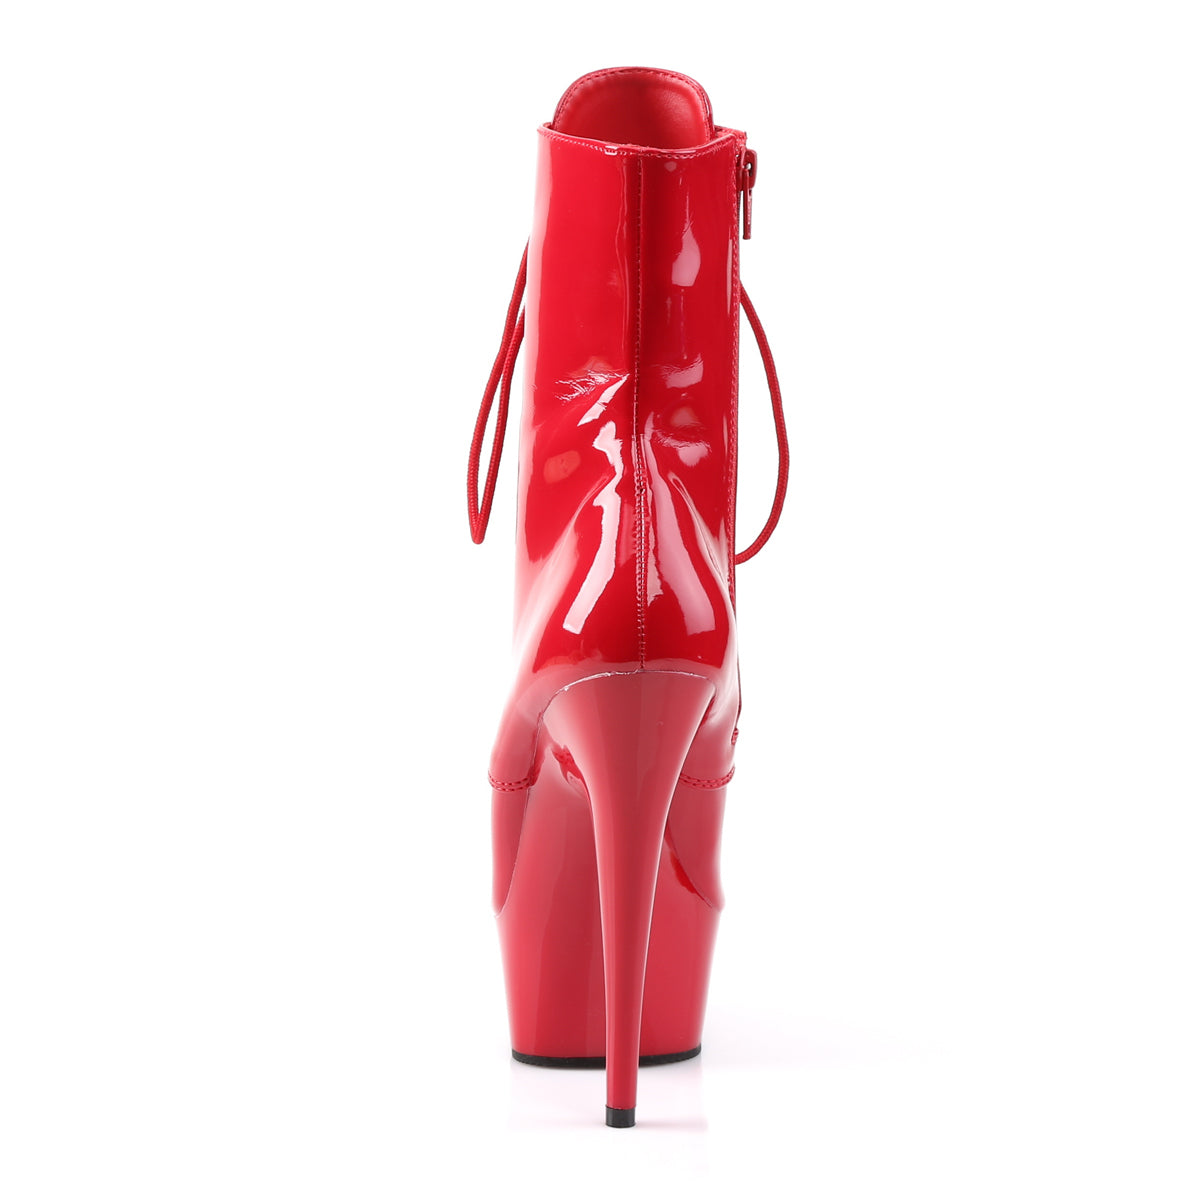 DELIGHT-1020 Red Calf High Boots